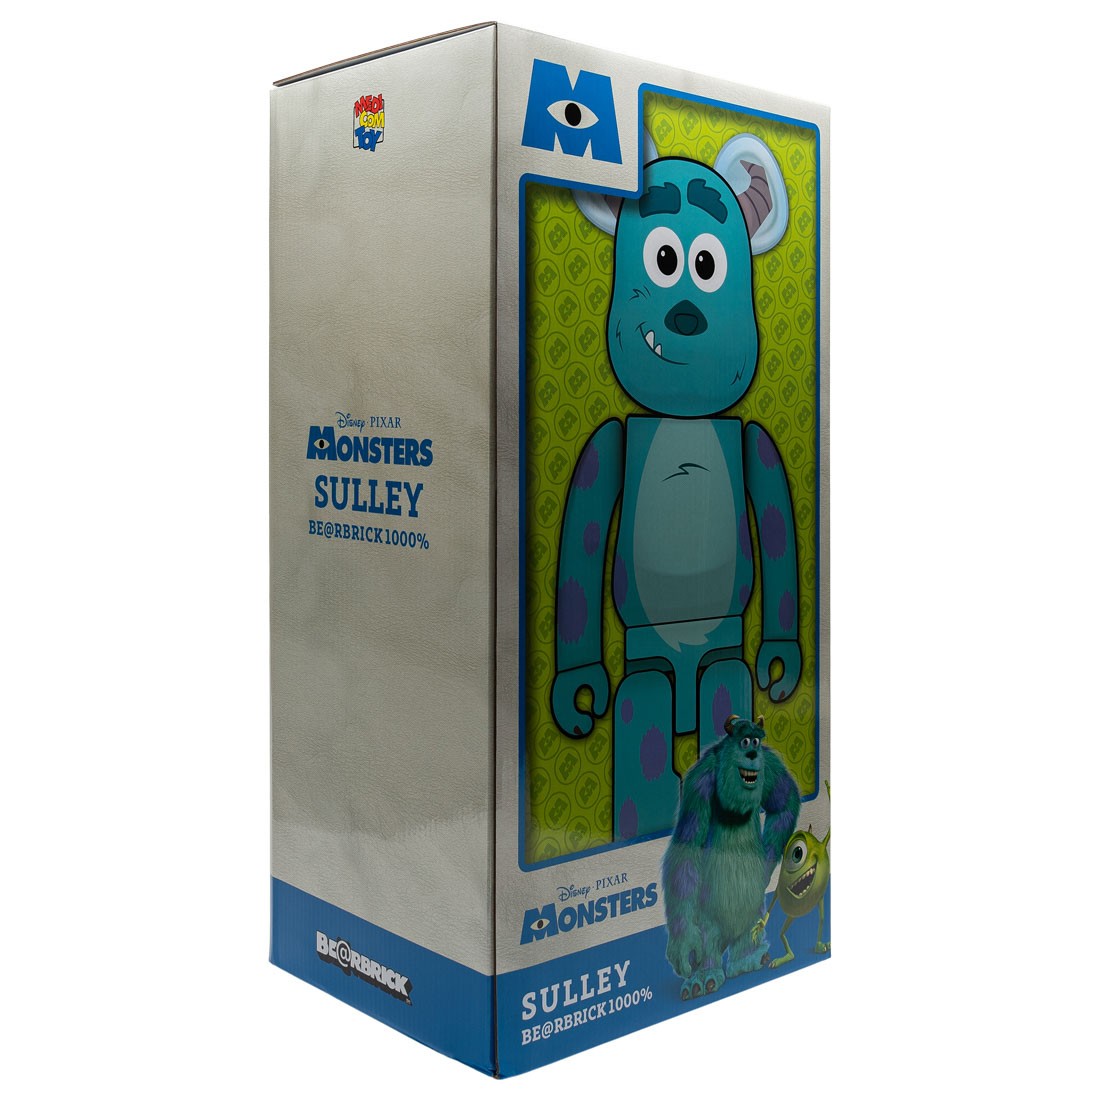 NEW通販】 BE@RBRICK SULLEY 1000% ベアブリック サリー wH3ob